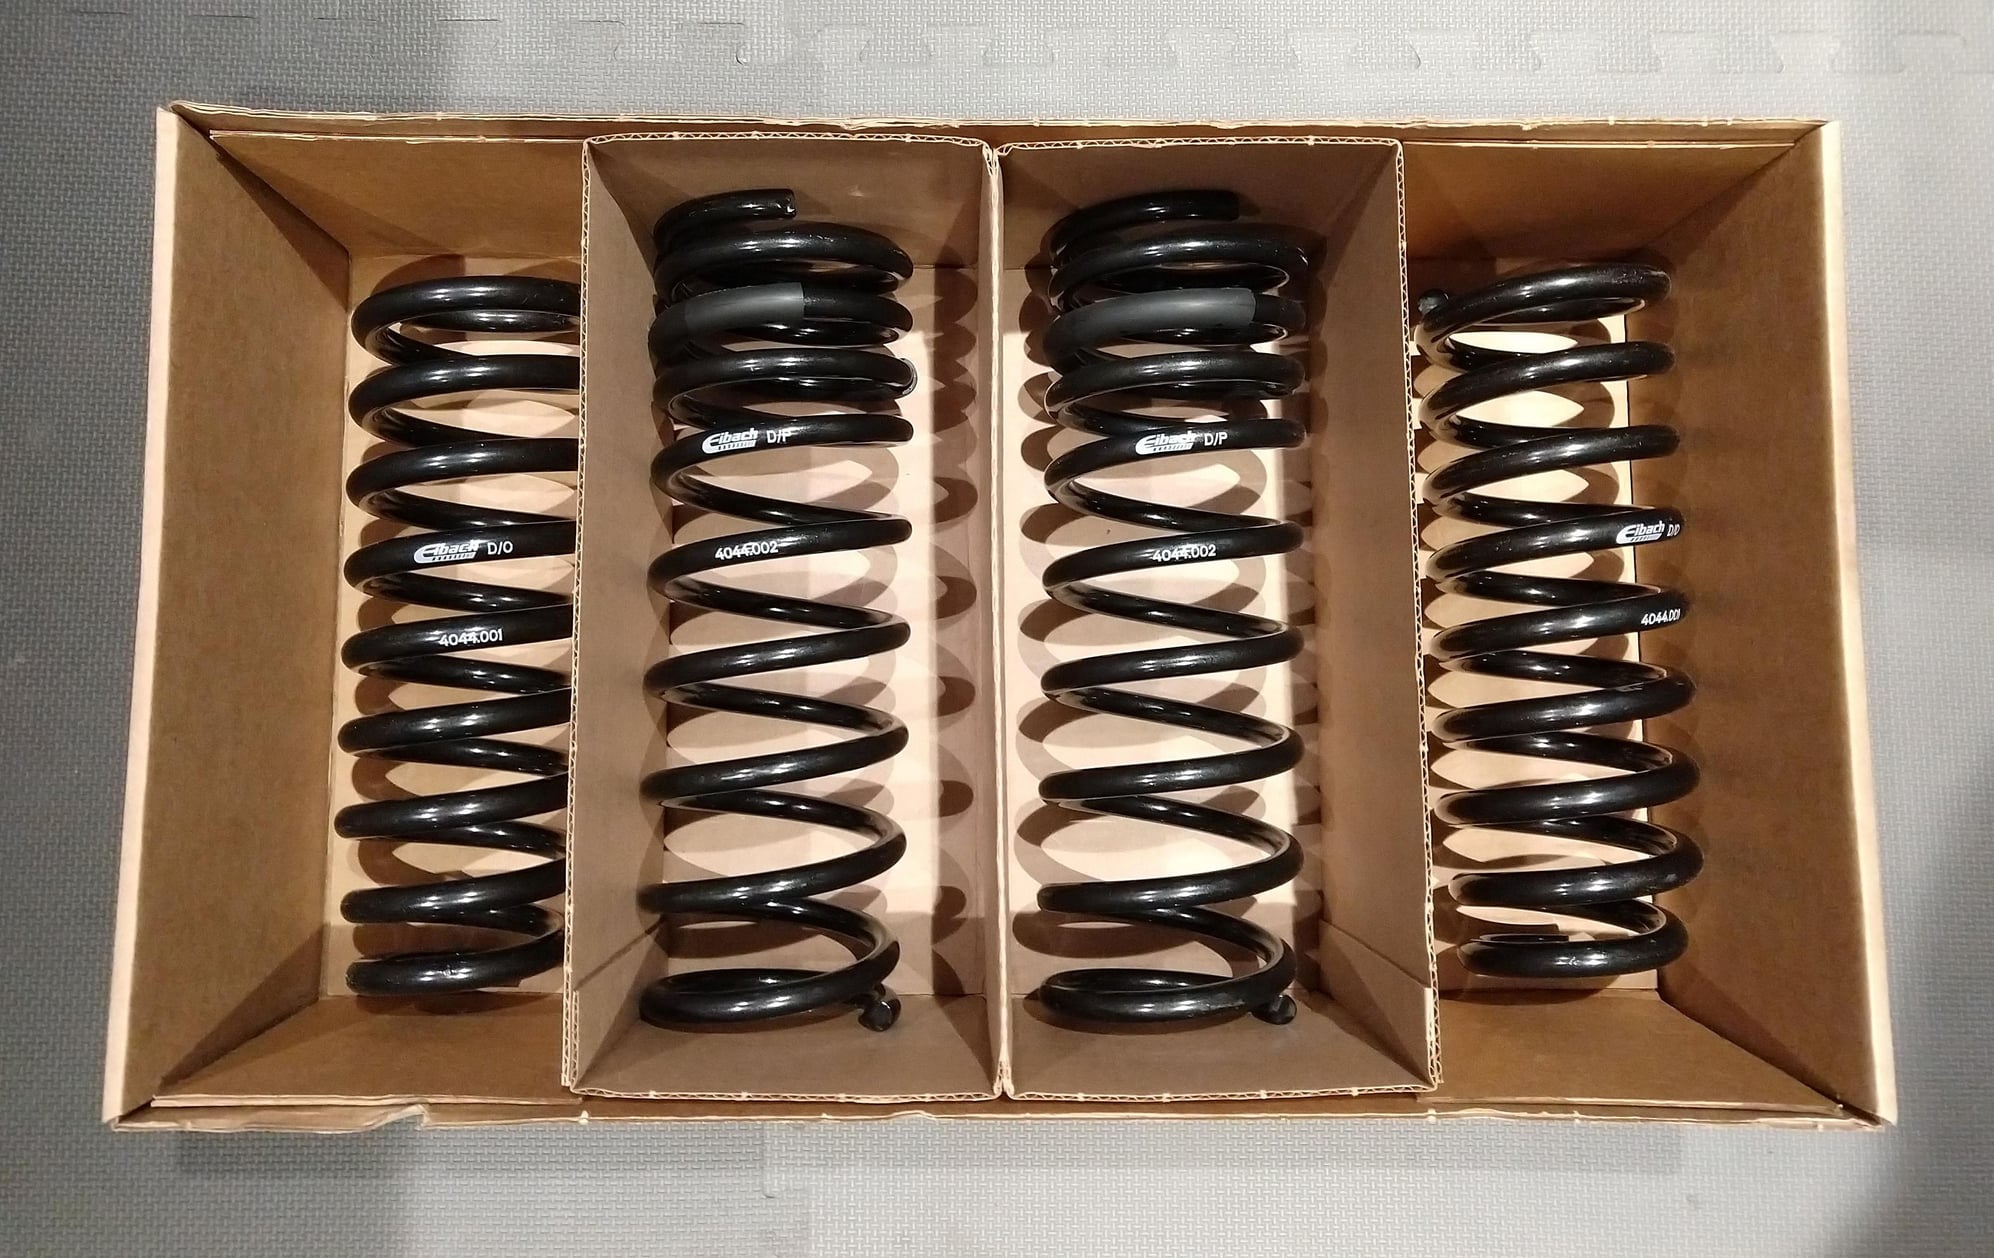 Steering/Suspension - SOLD: Eibach Pro-Kit lowering springs for 04-08 TL - New! - New - 2004 to 2008 Acura TL - Novi, MI 48375, United States